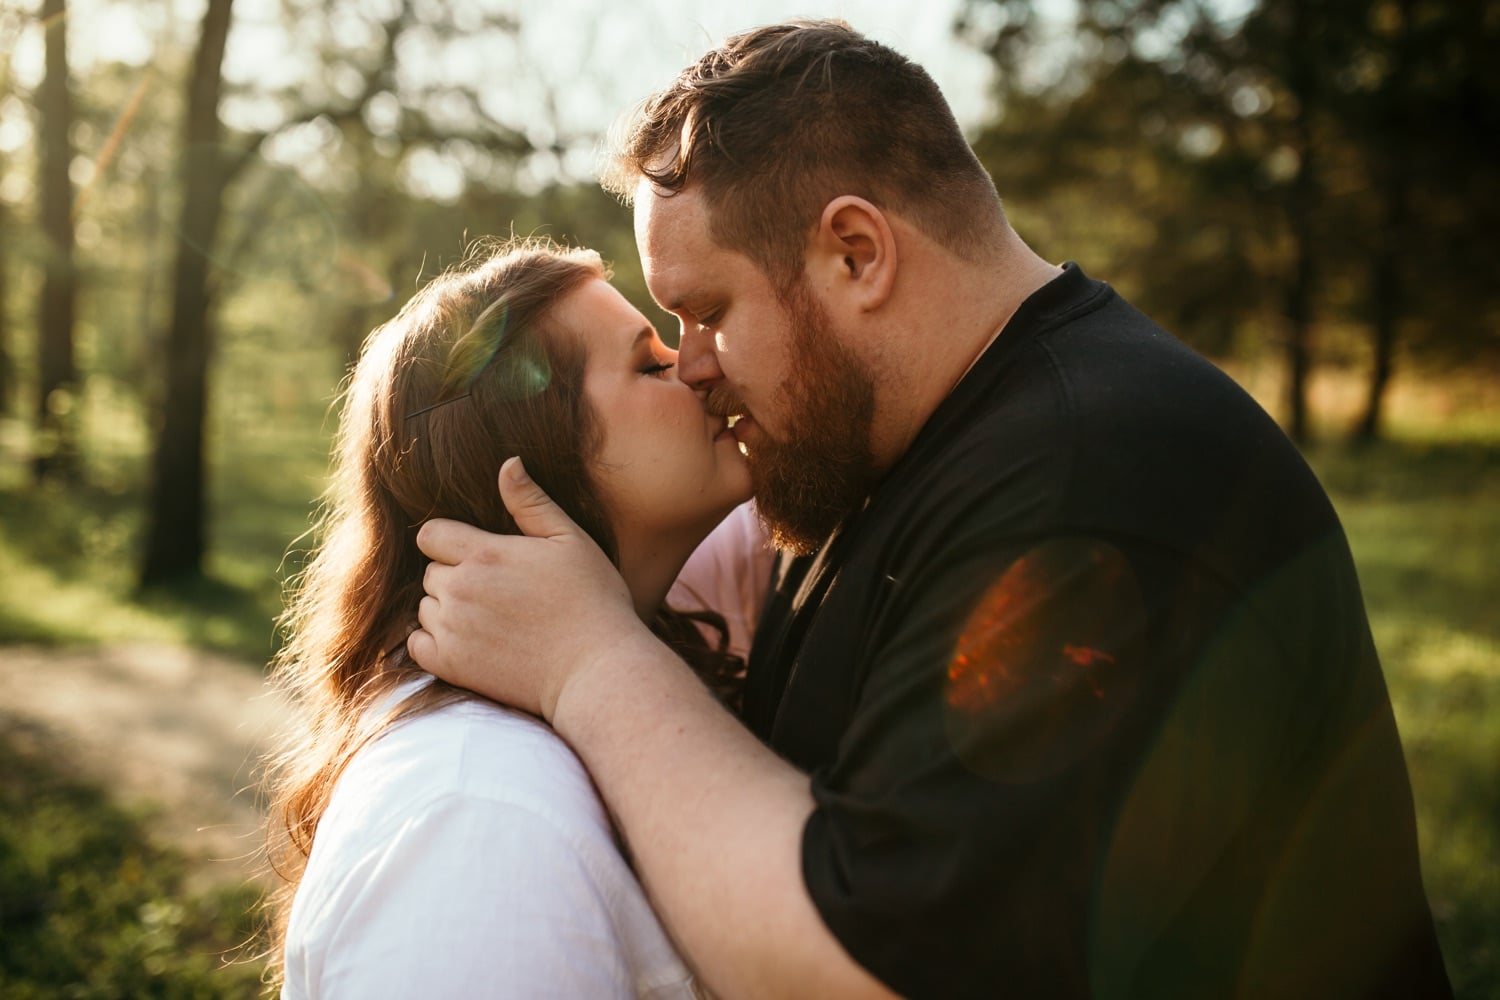 Our engagement pictures came in! Our 